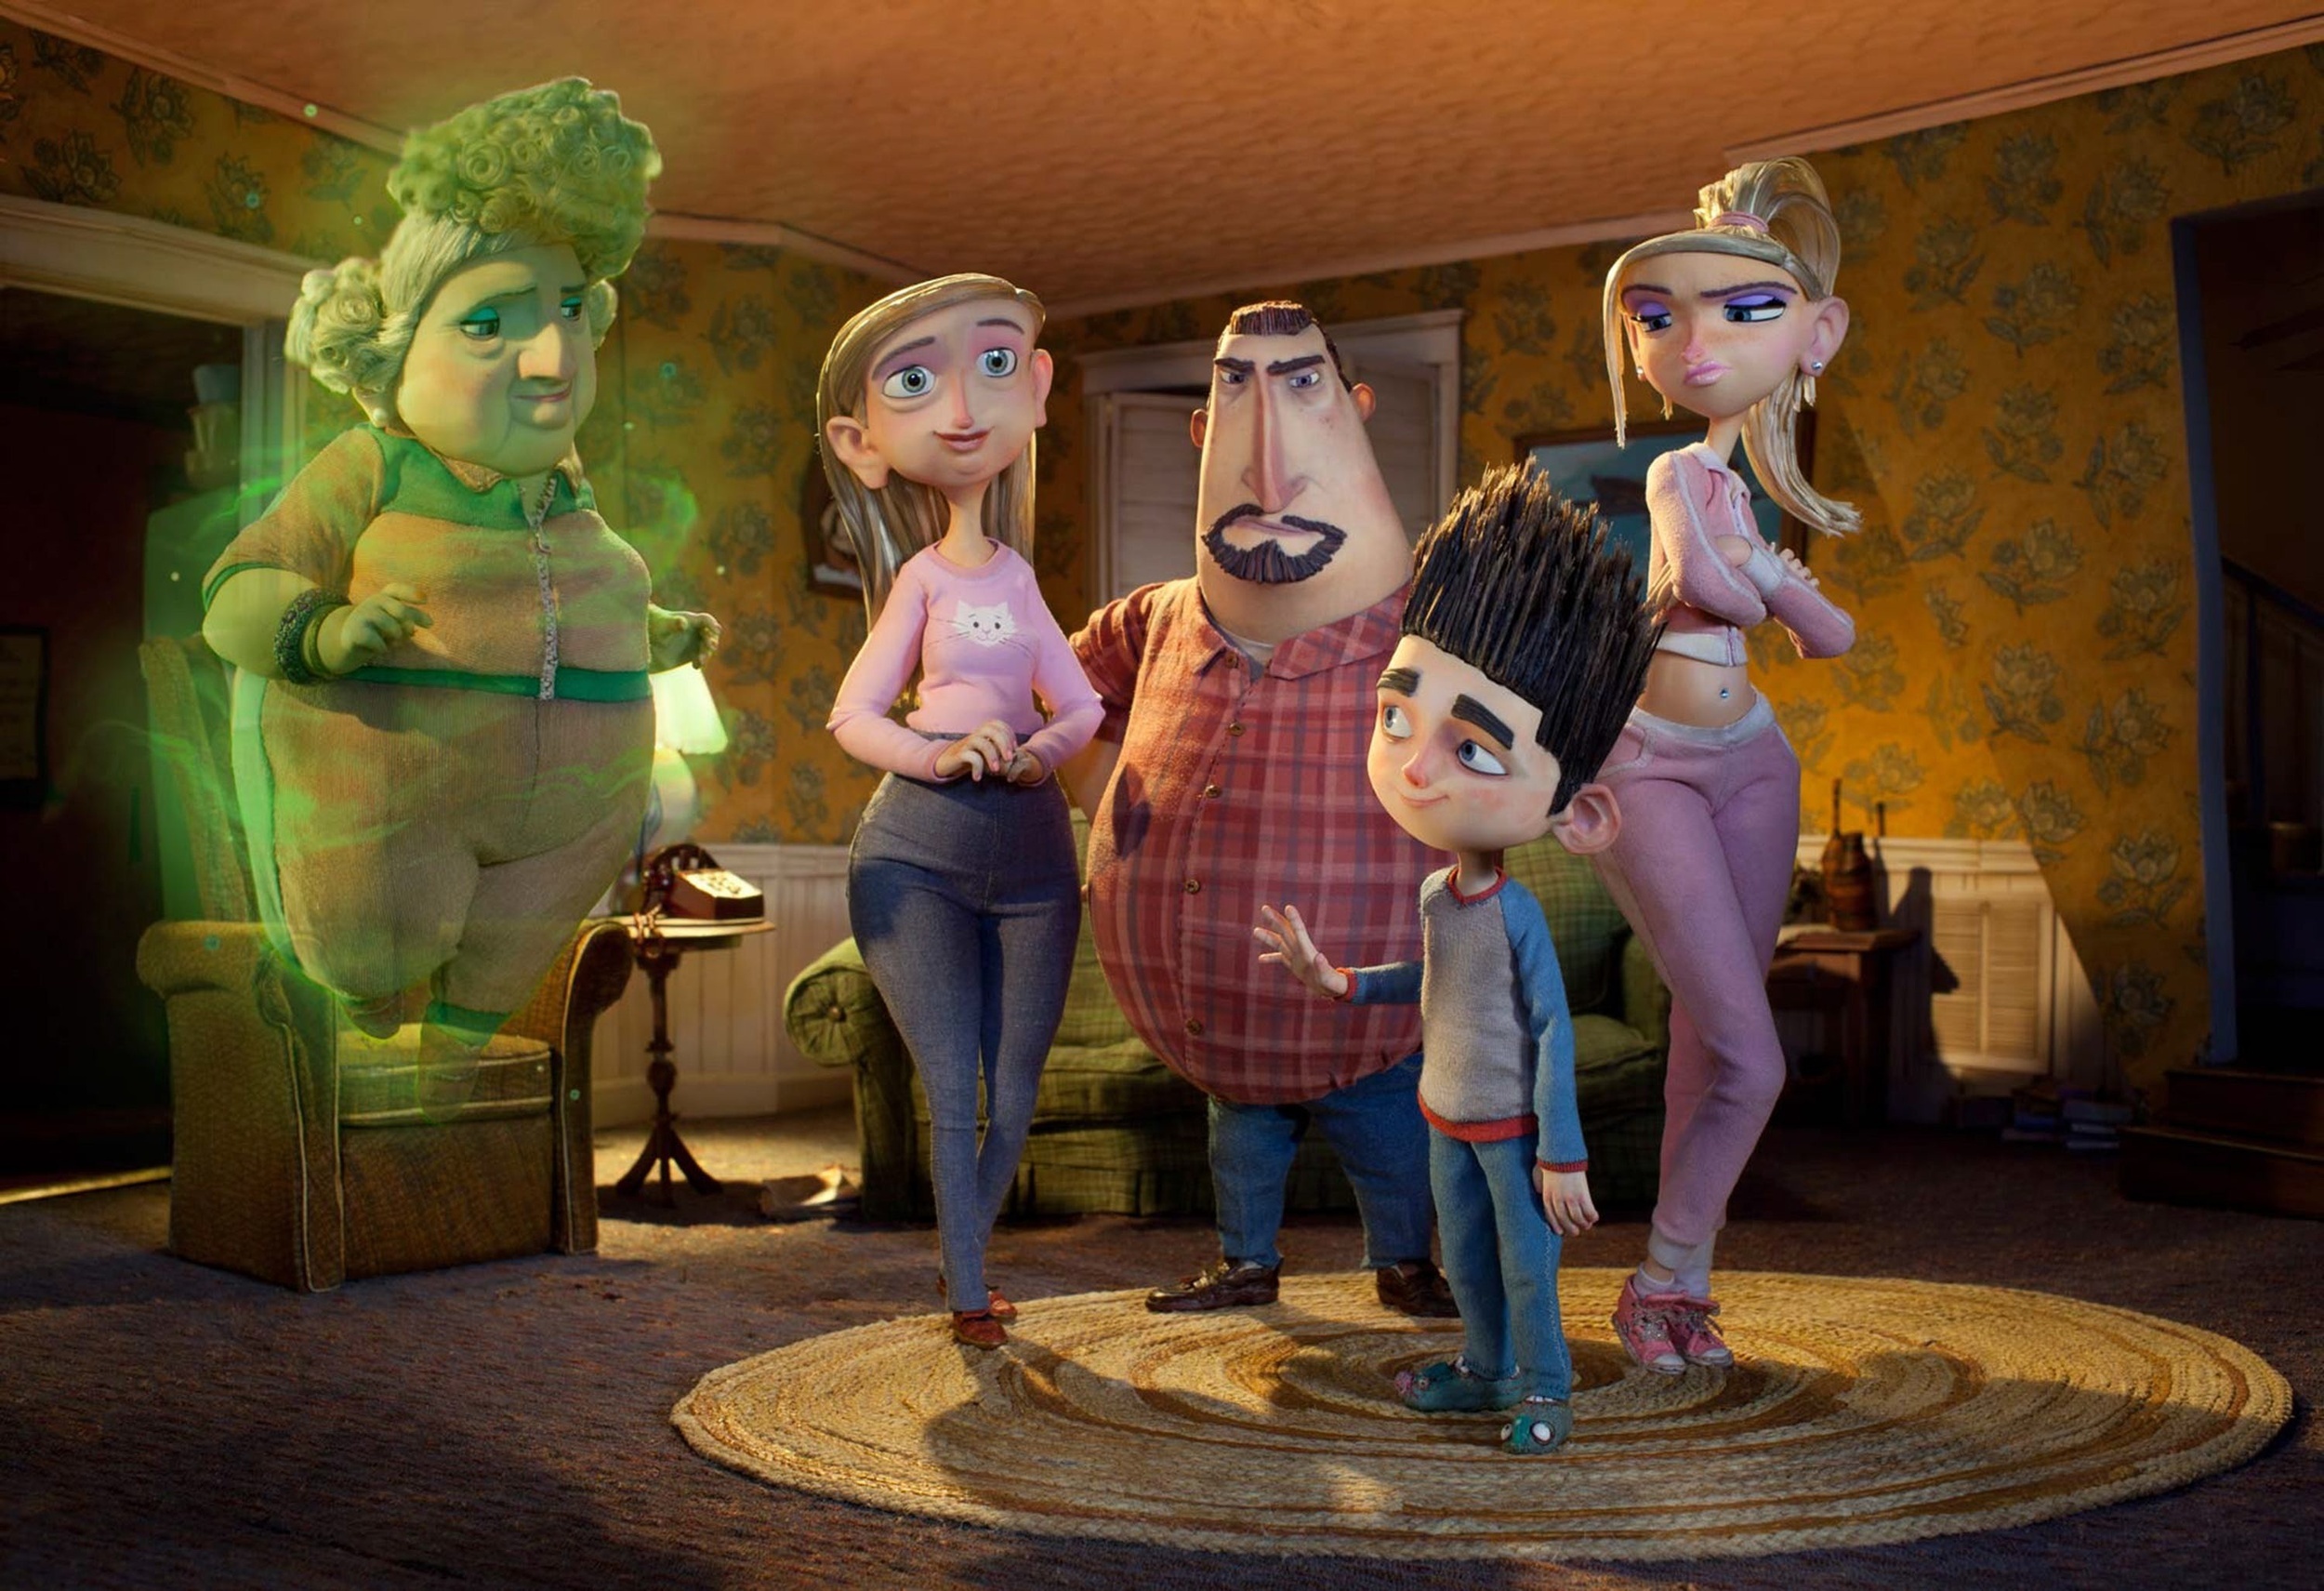 <p>After the success of <em>Coraline</em>, stop-animation house Laika released their second feature film, <em>ParaNorman.</em> Norman, a young boy who can speak to ghosts, must use his abilities to save his town from a deadly curse. He teams up with various eclectic characters, including his bratty older sister and her jock boyfriend. Filled with suburban thrills, zombies, and plenty of laughs, <em>ParaNorman</em> is gorgeously animated with perfectly family-friendly spooky vibes. </p><p><a href='https://www.msn.com/en-us/community/channel/vid-cj9pqbr0vn9in2b6ddcd8sfgpfq6x6utp44fssrv6mc2gtybw0us'>Follow us on MSN to see more of our exclusive entertainment content.</a></p>